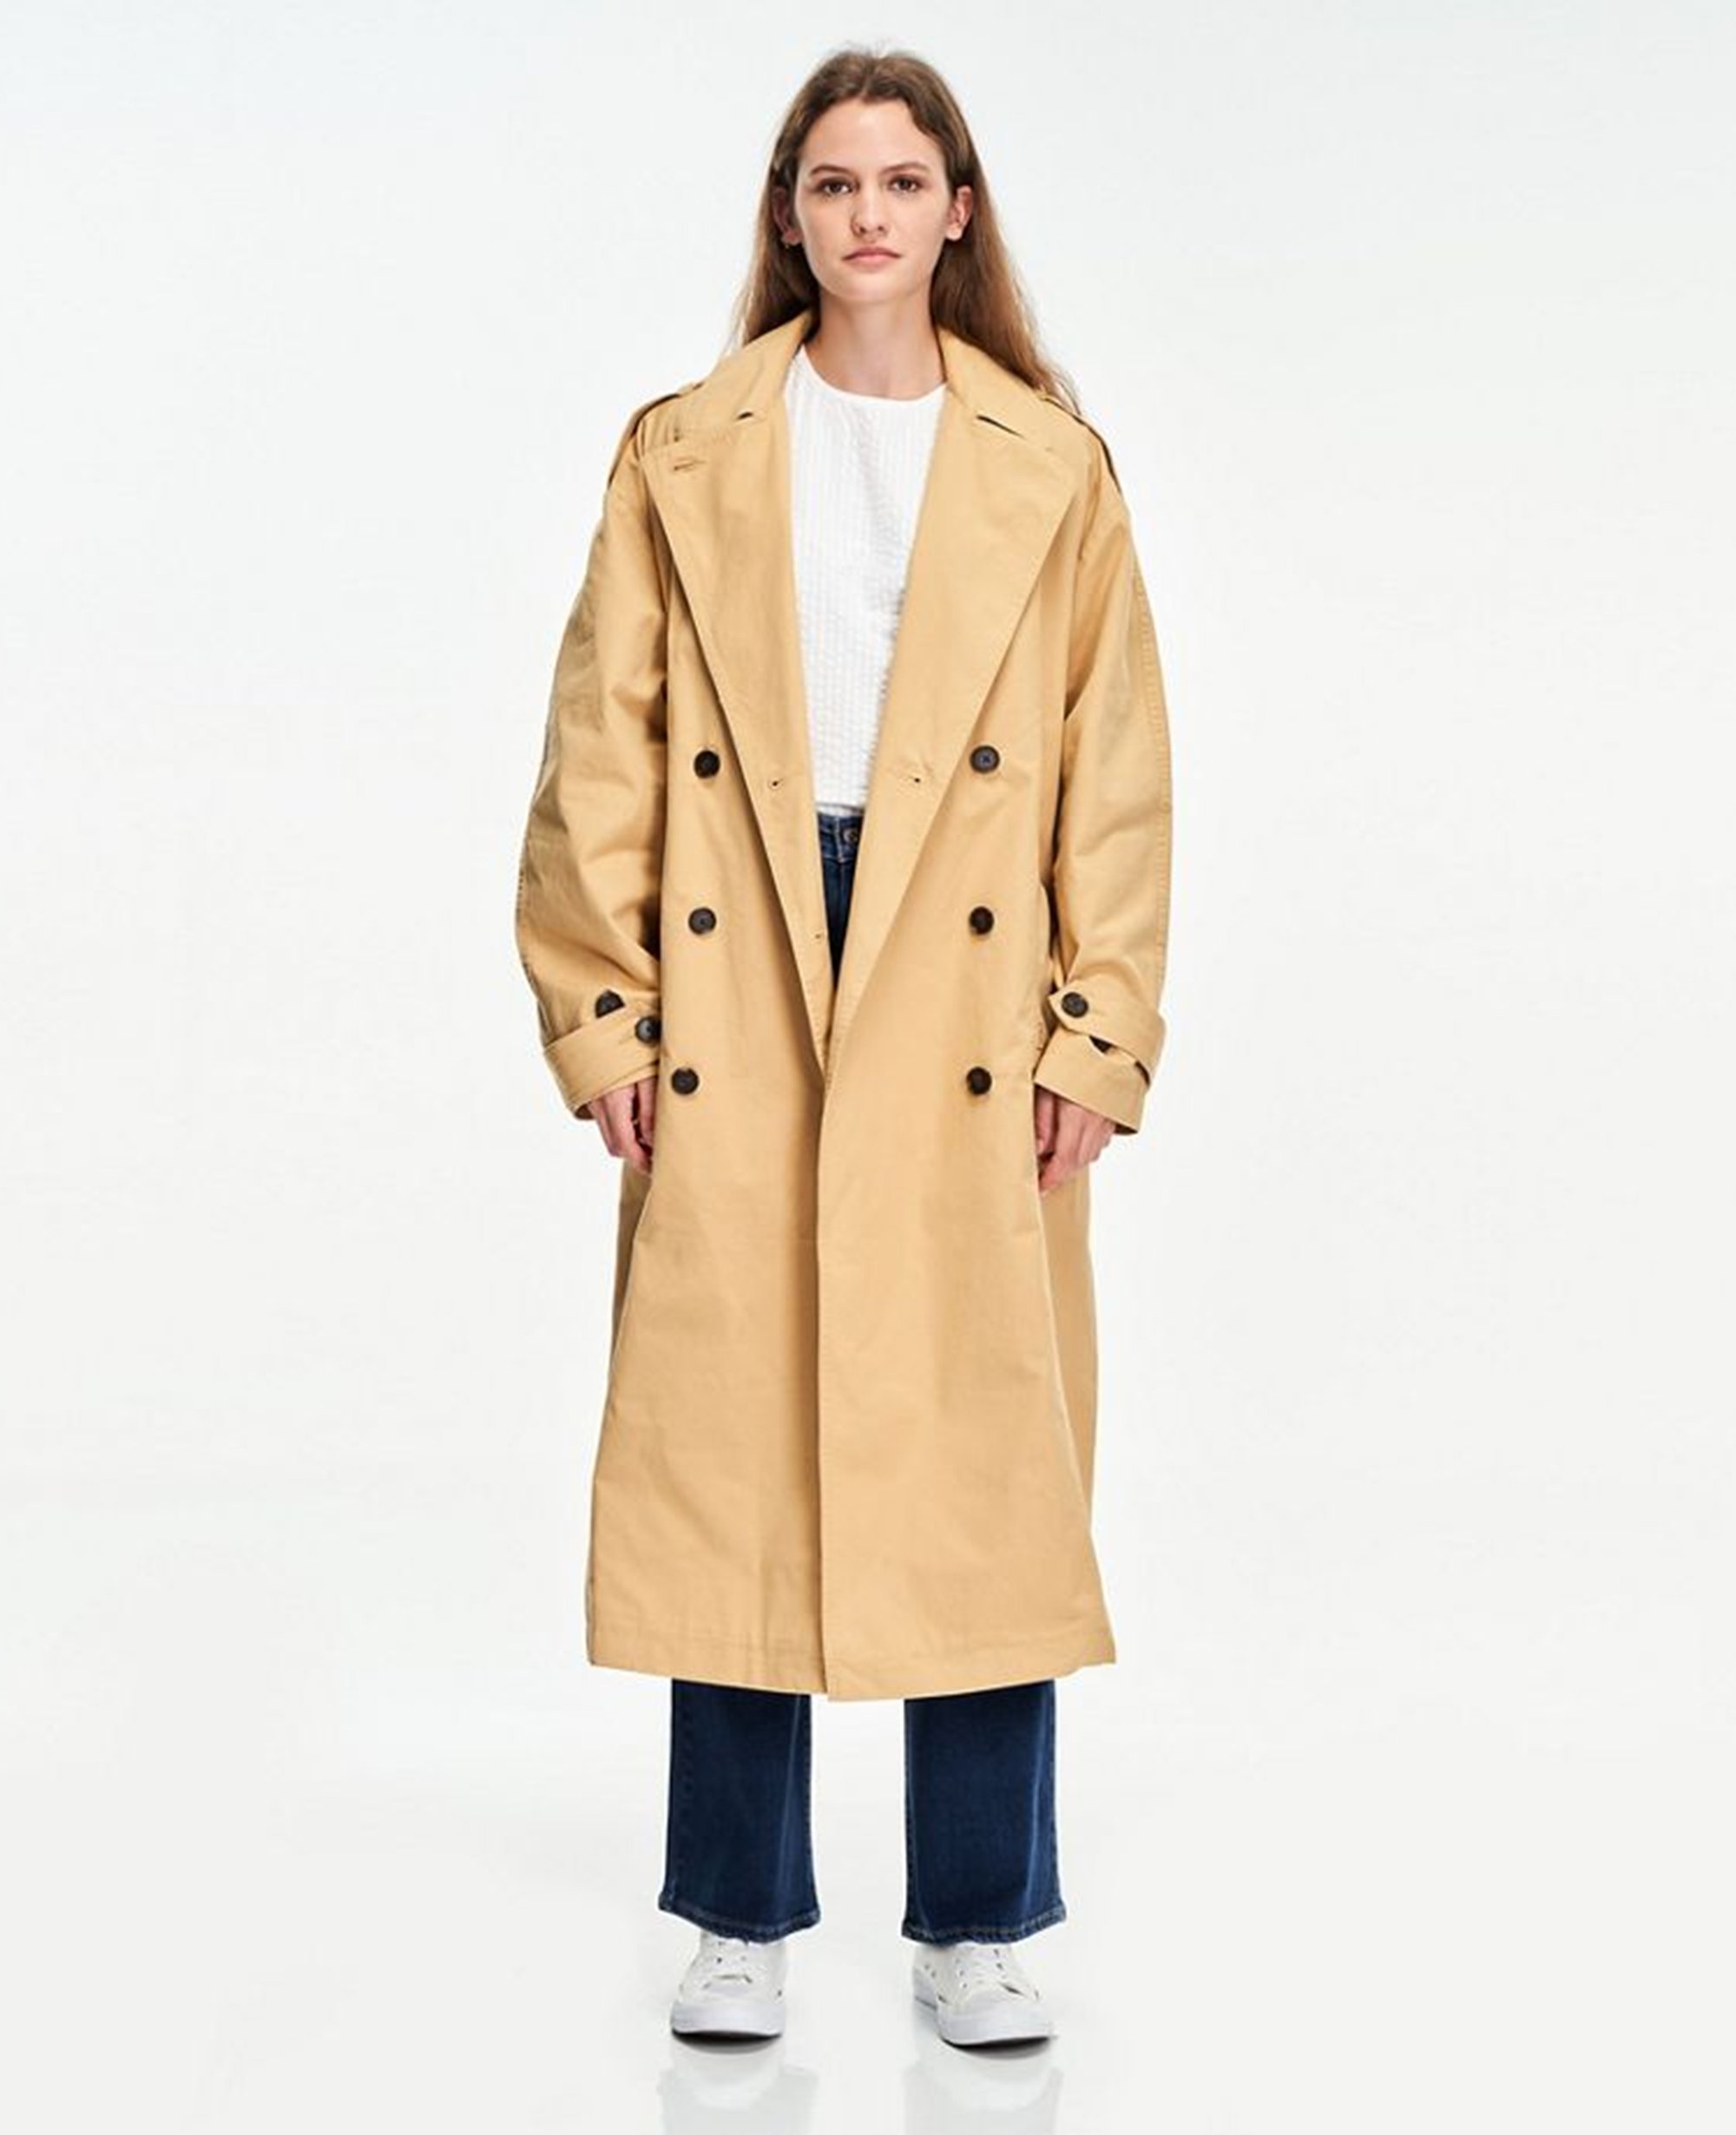 Best Trench Coats 2023: The Best Expensive Looking Coats under £200